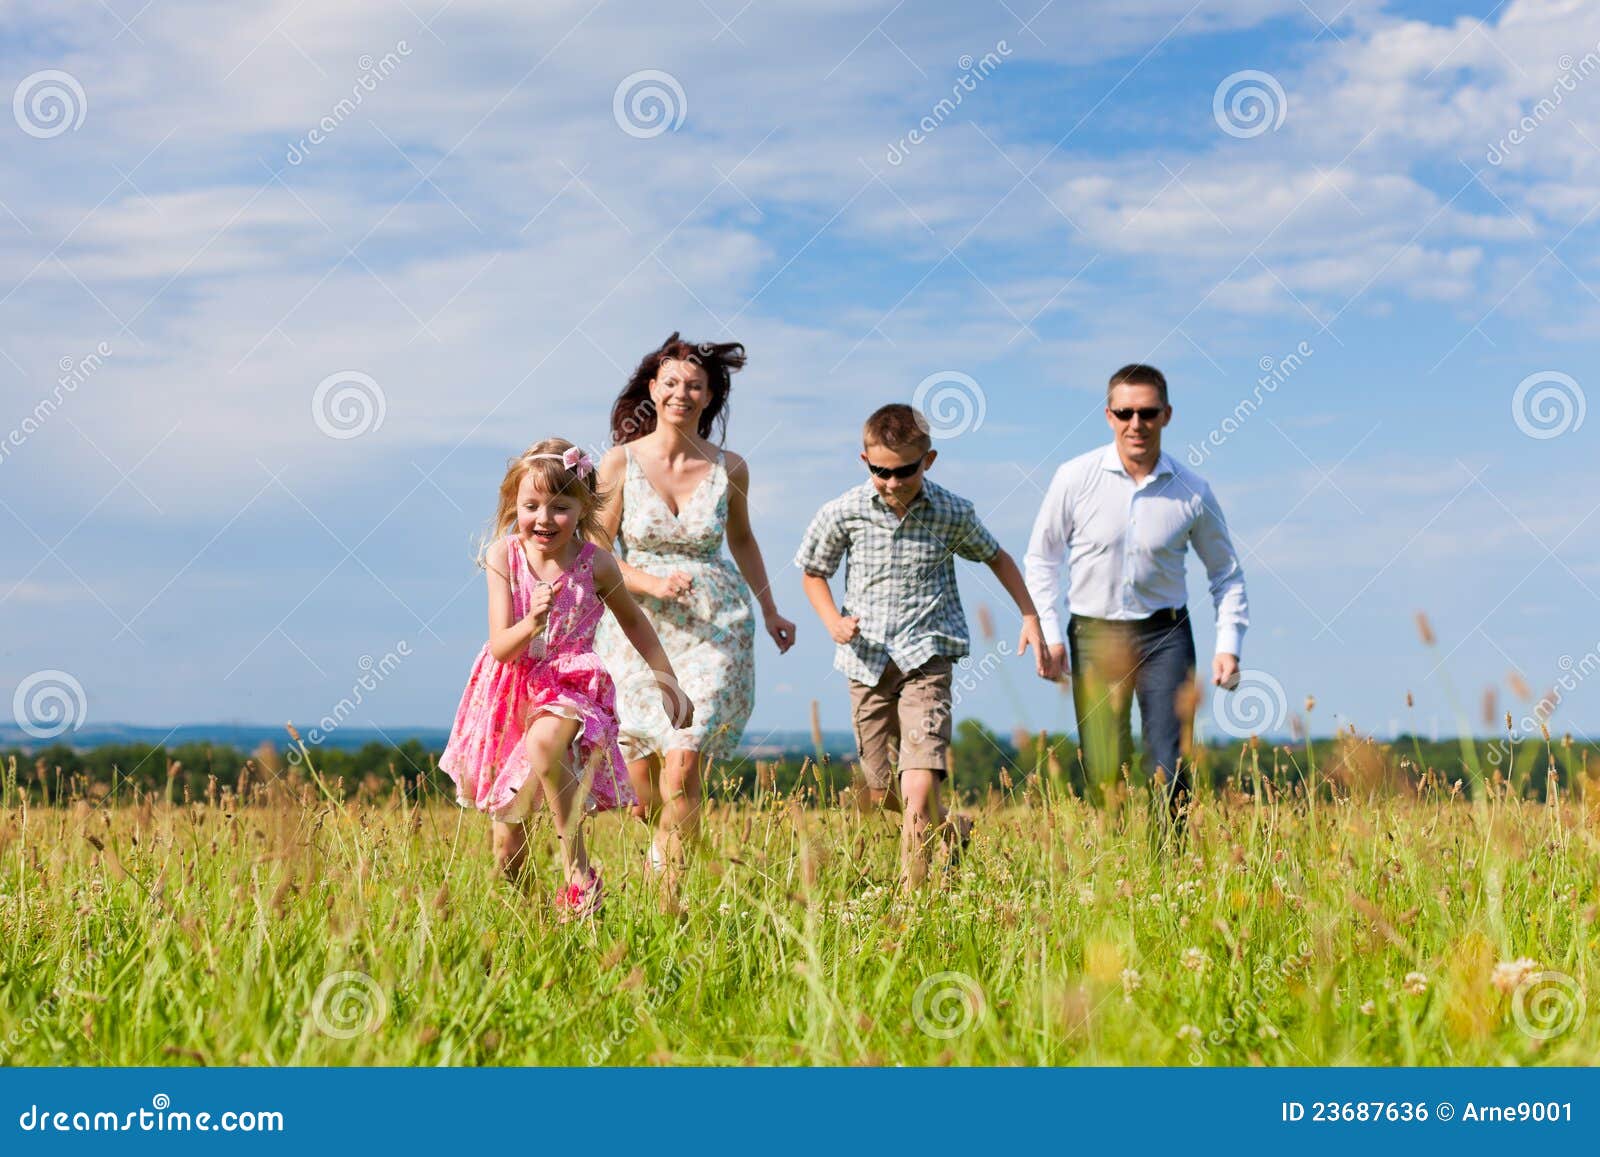 Happy family enjoying life together at meadow outdoor. Royalty-Free Stock  Image - Storyblocks